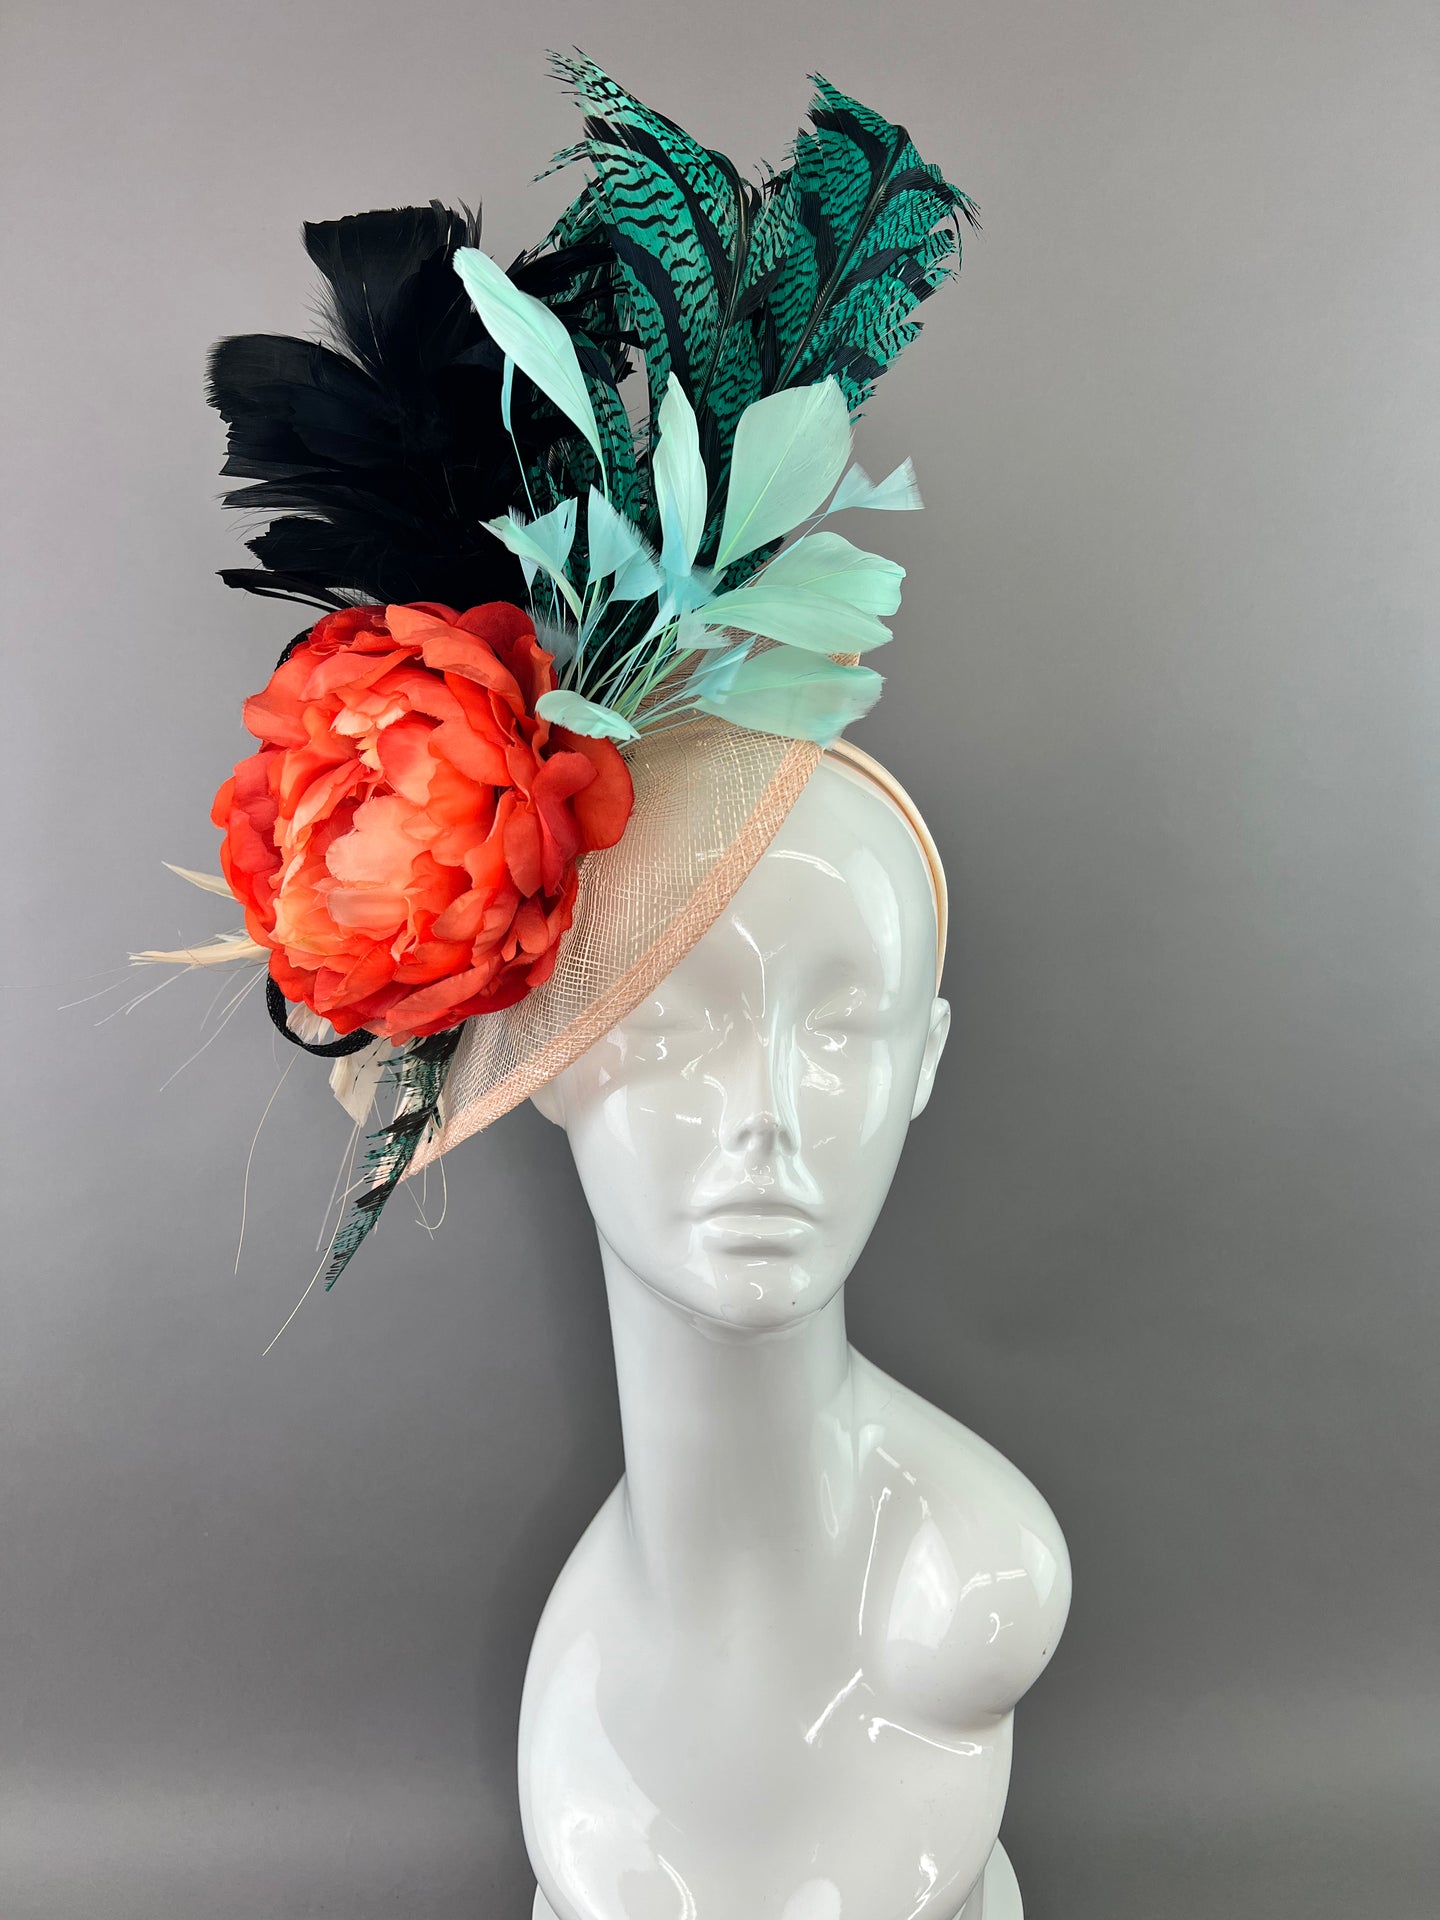 TEAL AND MINT FASCINATOR WITH ORANGE BLOOM